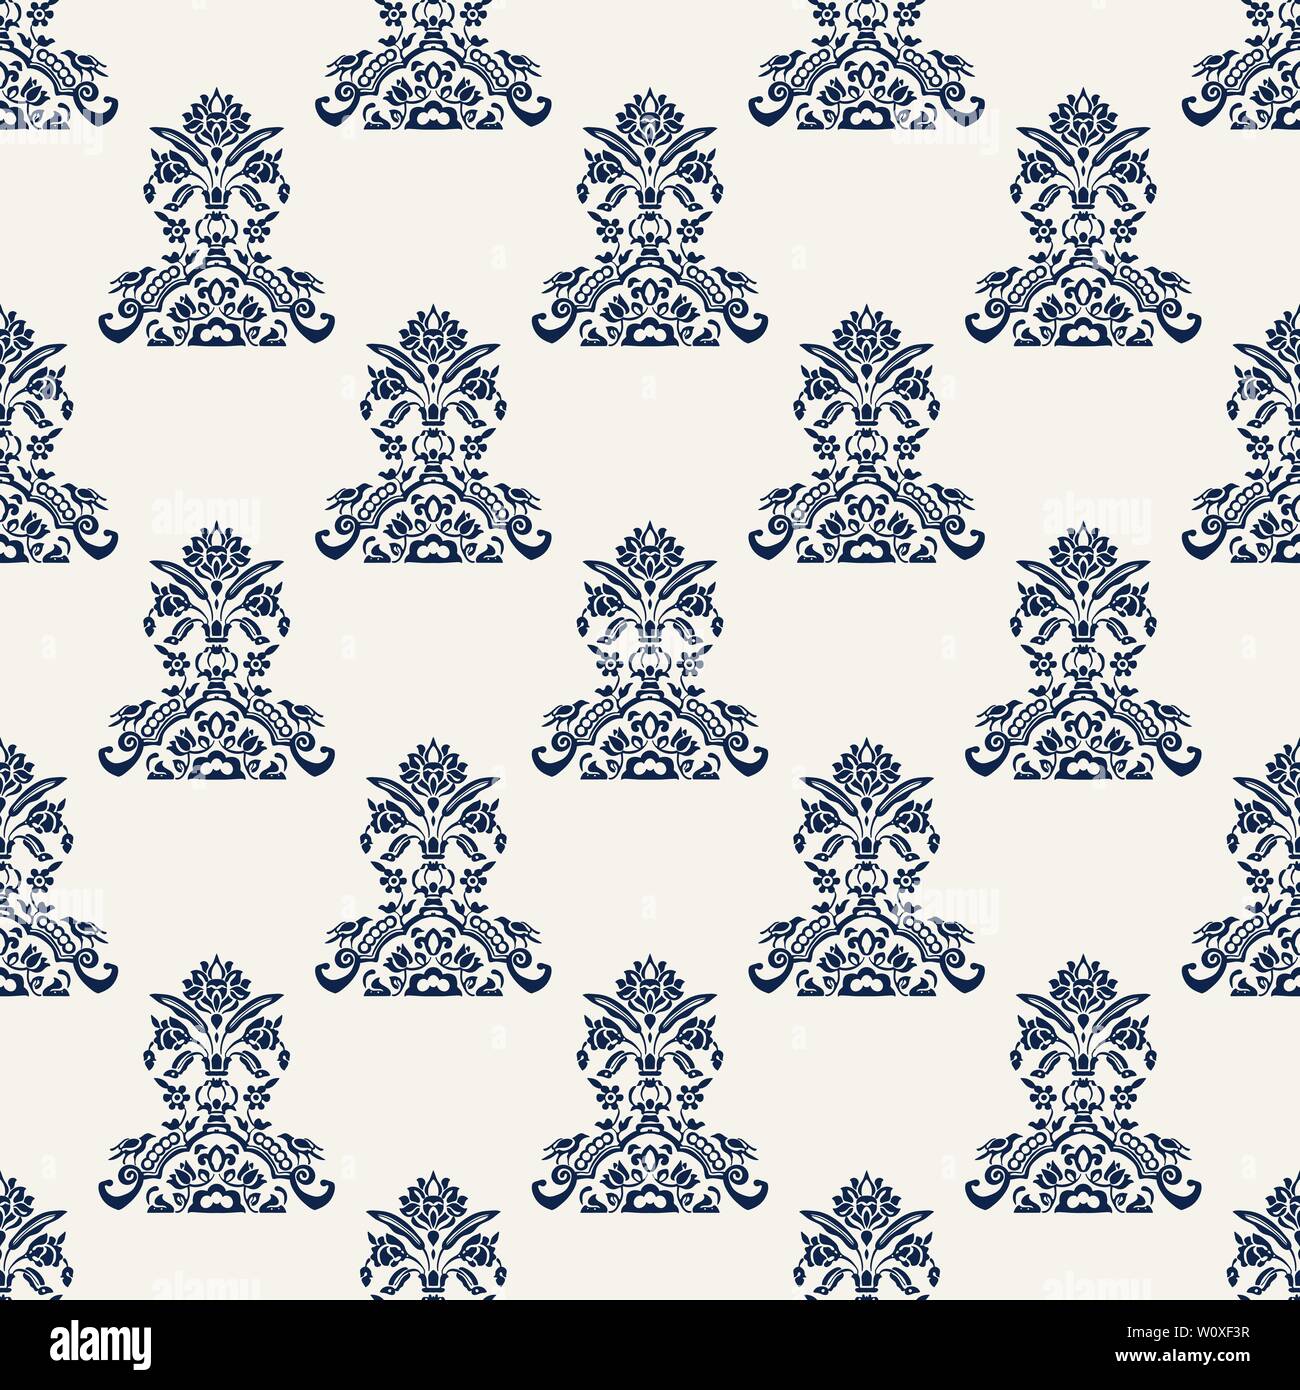 Indigo dye woodblock printed seamless ethnic floral all over pattern. Traditional oriental motif of India with flowers and birds, ecru on navy blue ba Stock Vector